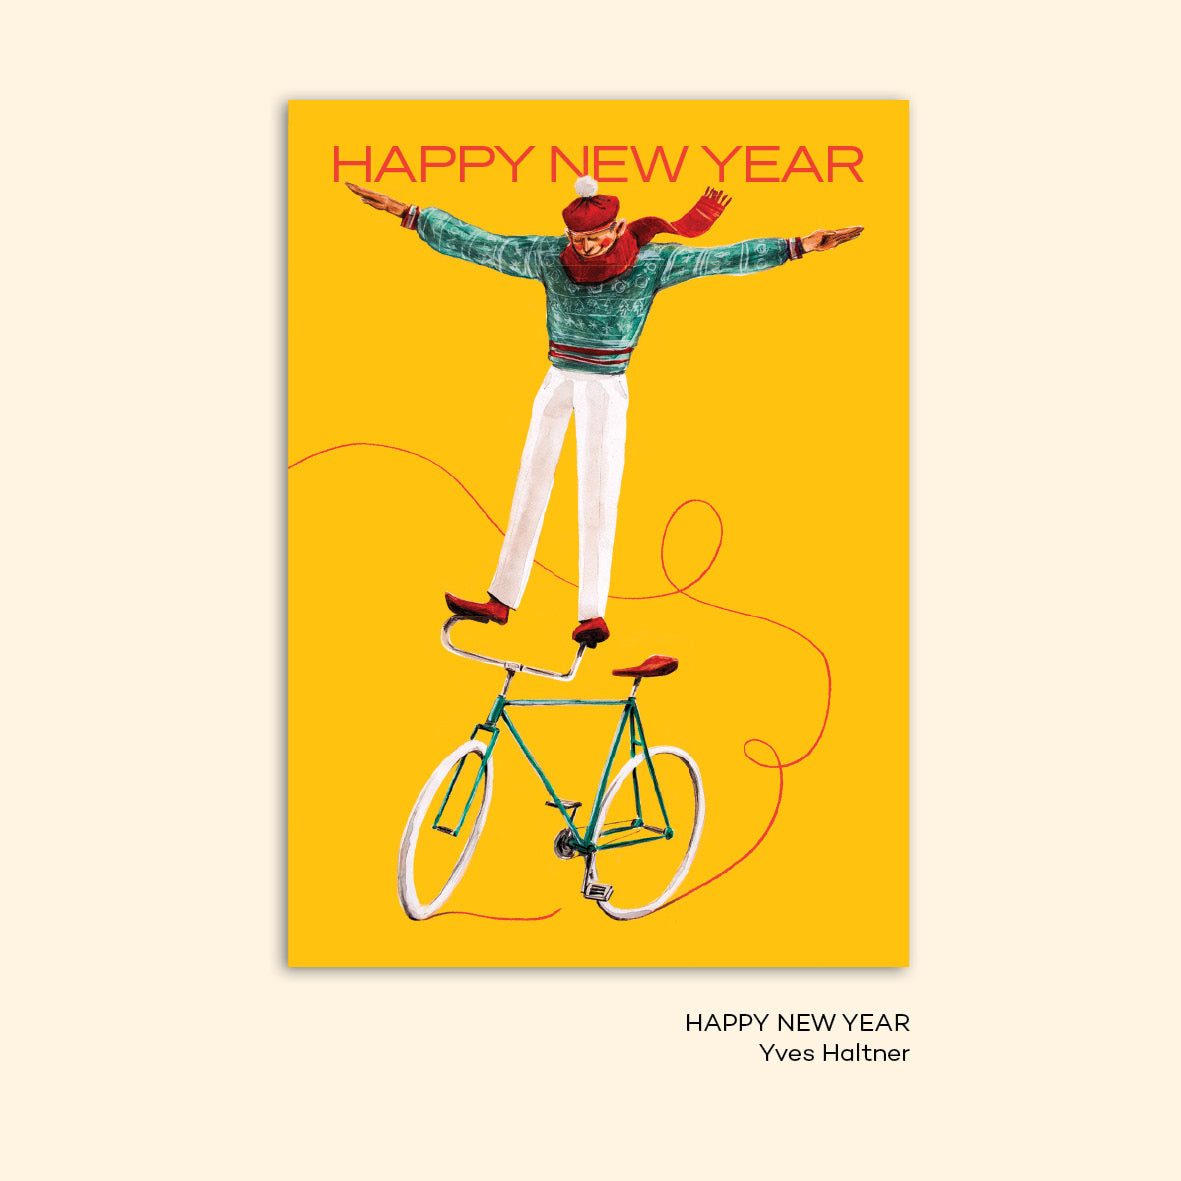 HAPPY NEW YEAR greeting card